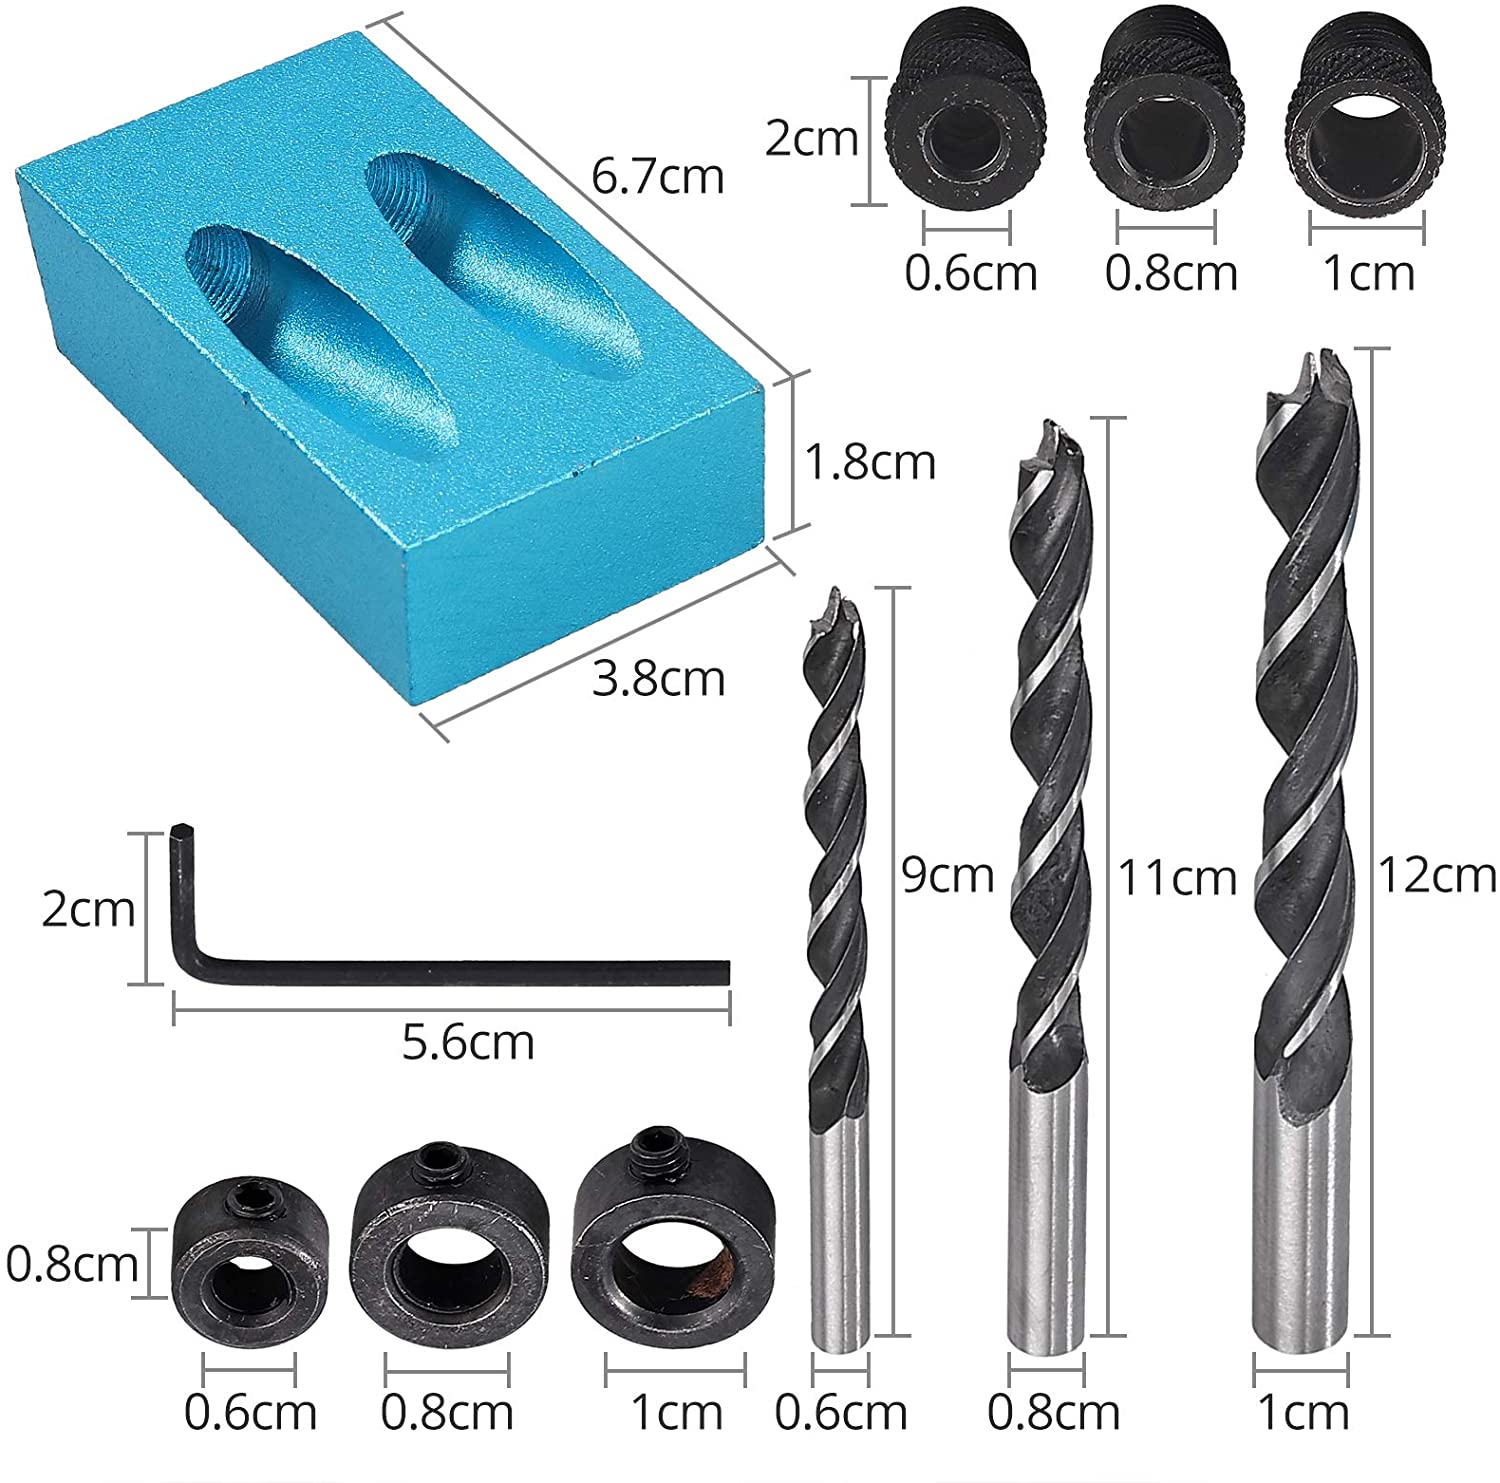 Walmeck 15pcs Pocket Hole Jig Kit 8mm 10mm 15 Degree Angle Drill Guide  Woodwoorking Tool Inclined Hole Jig Hole Puncher Locator Jig Drill Bit